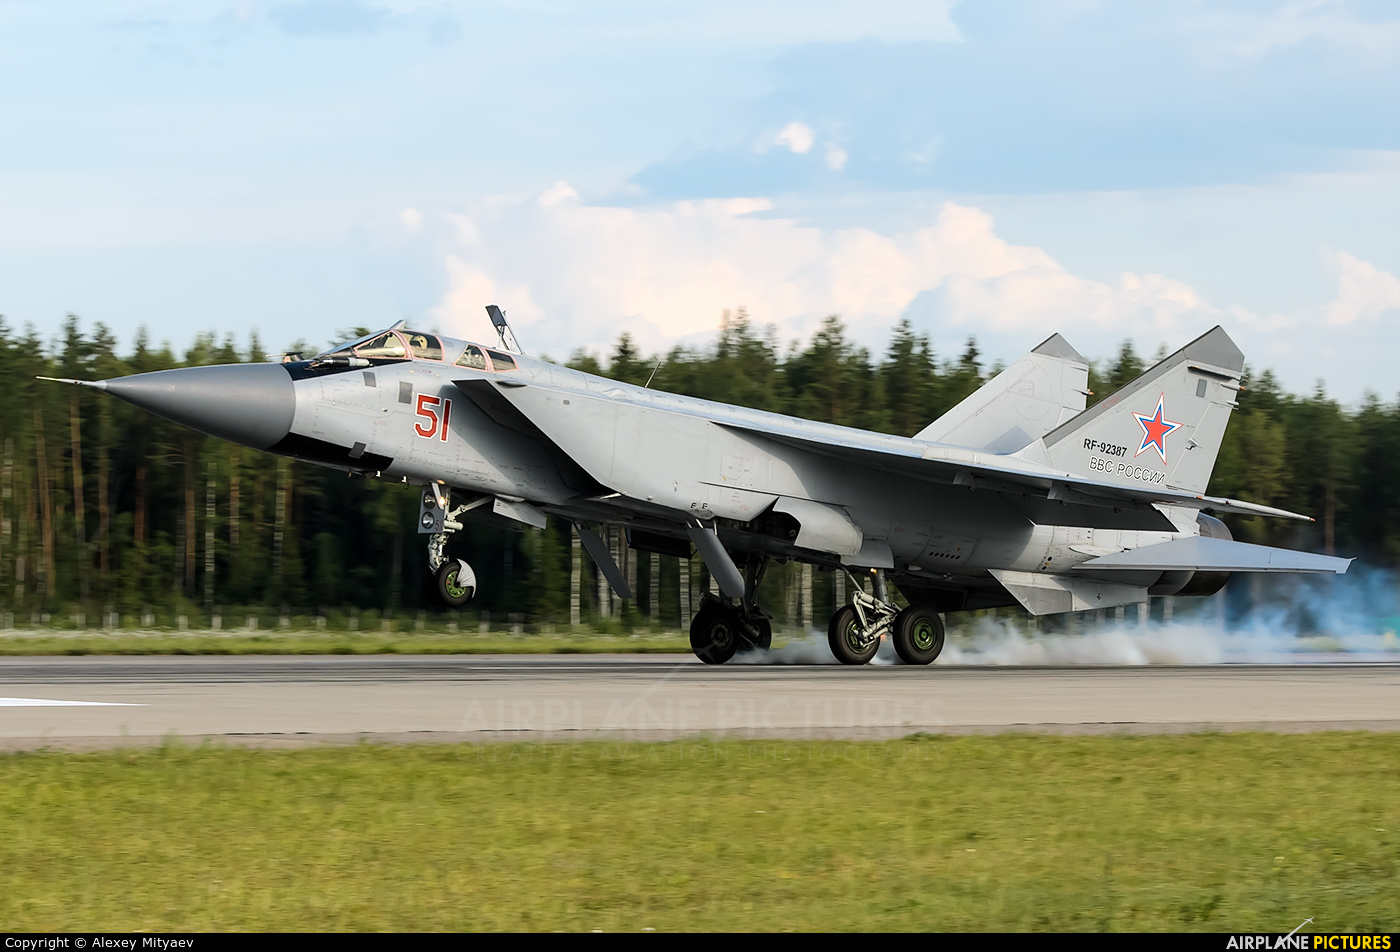 Russia - Air Force 51 aircraft at Undisclosed Location